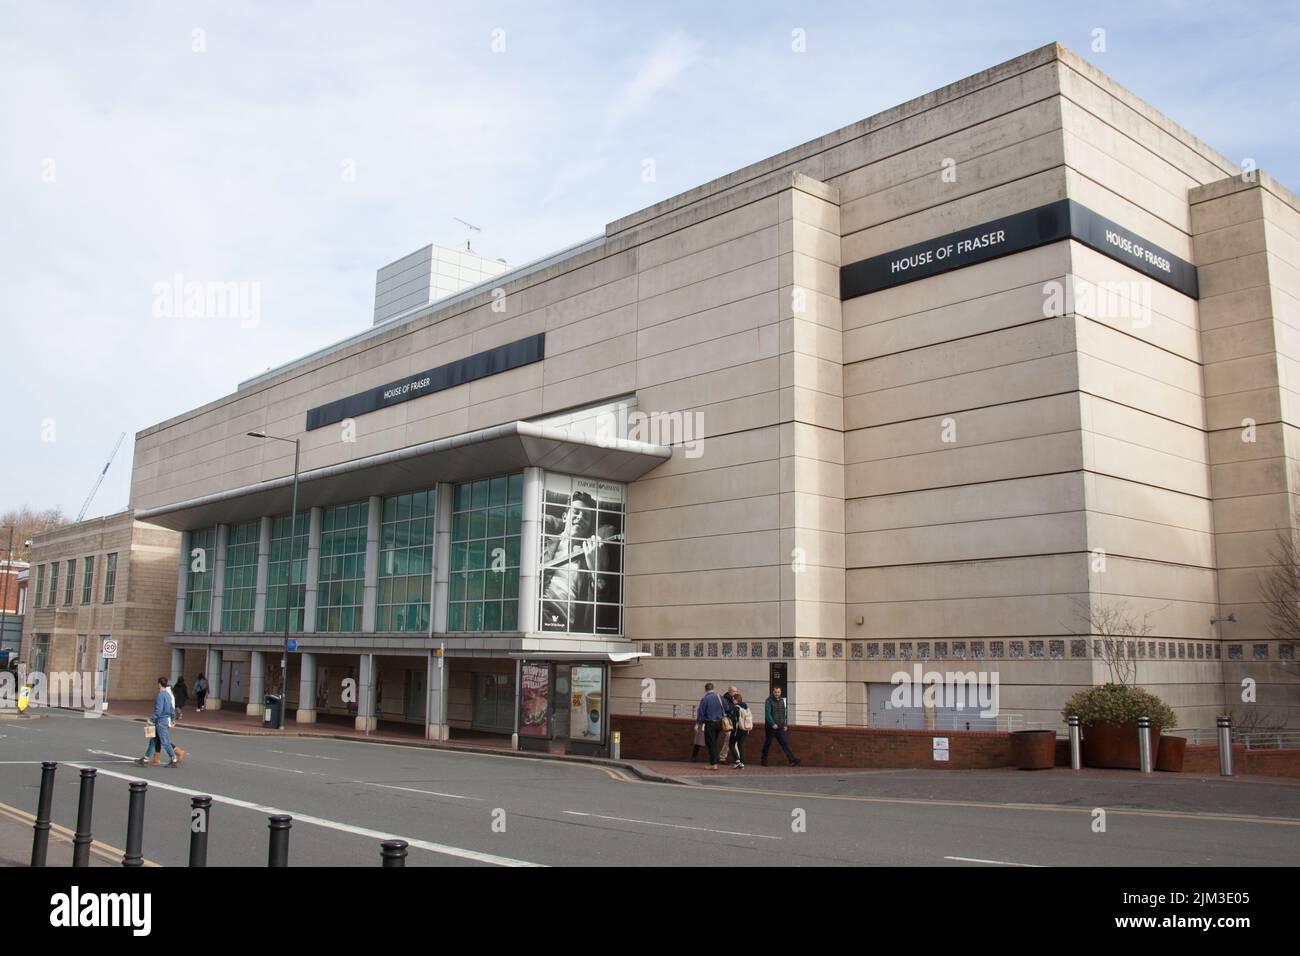 The House of Fraser building in Reading, Berkshire in the UK Stock Photo